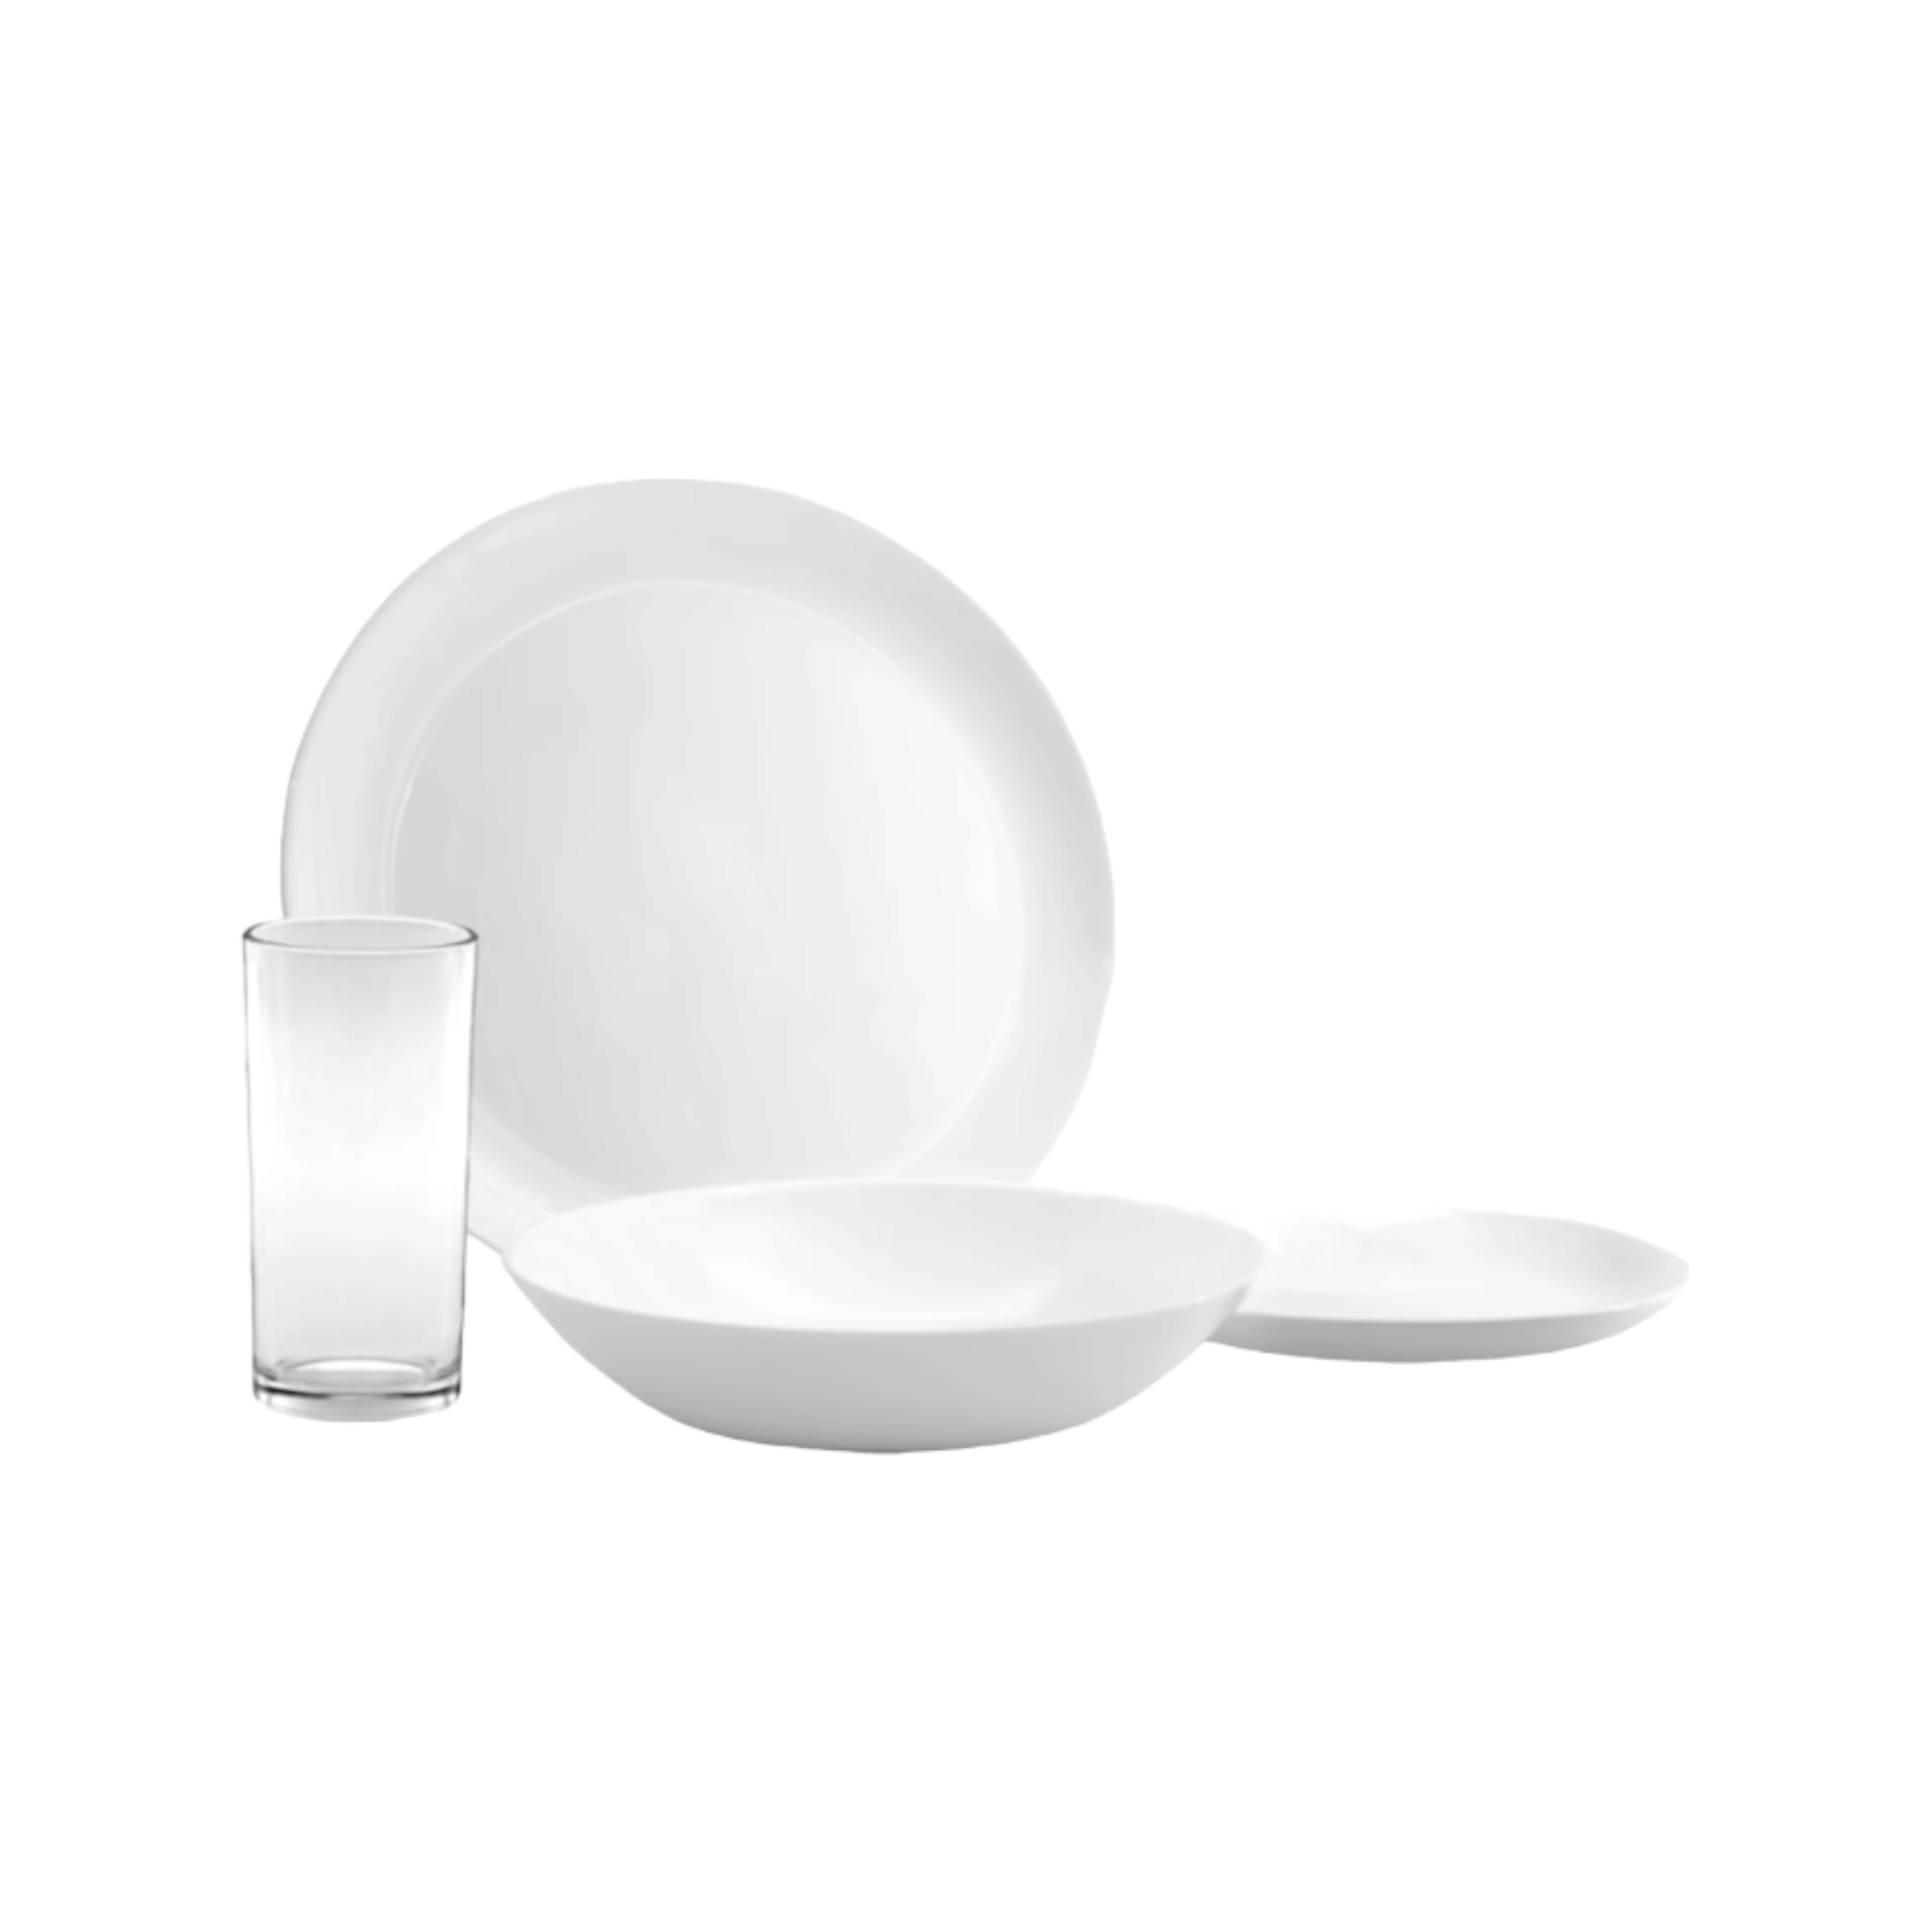 Consol Opal Dinner Set 16piece with Tumbler 17194